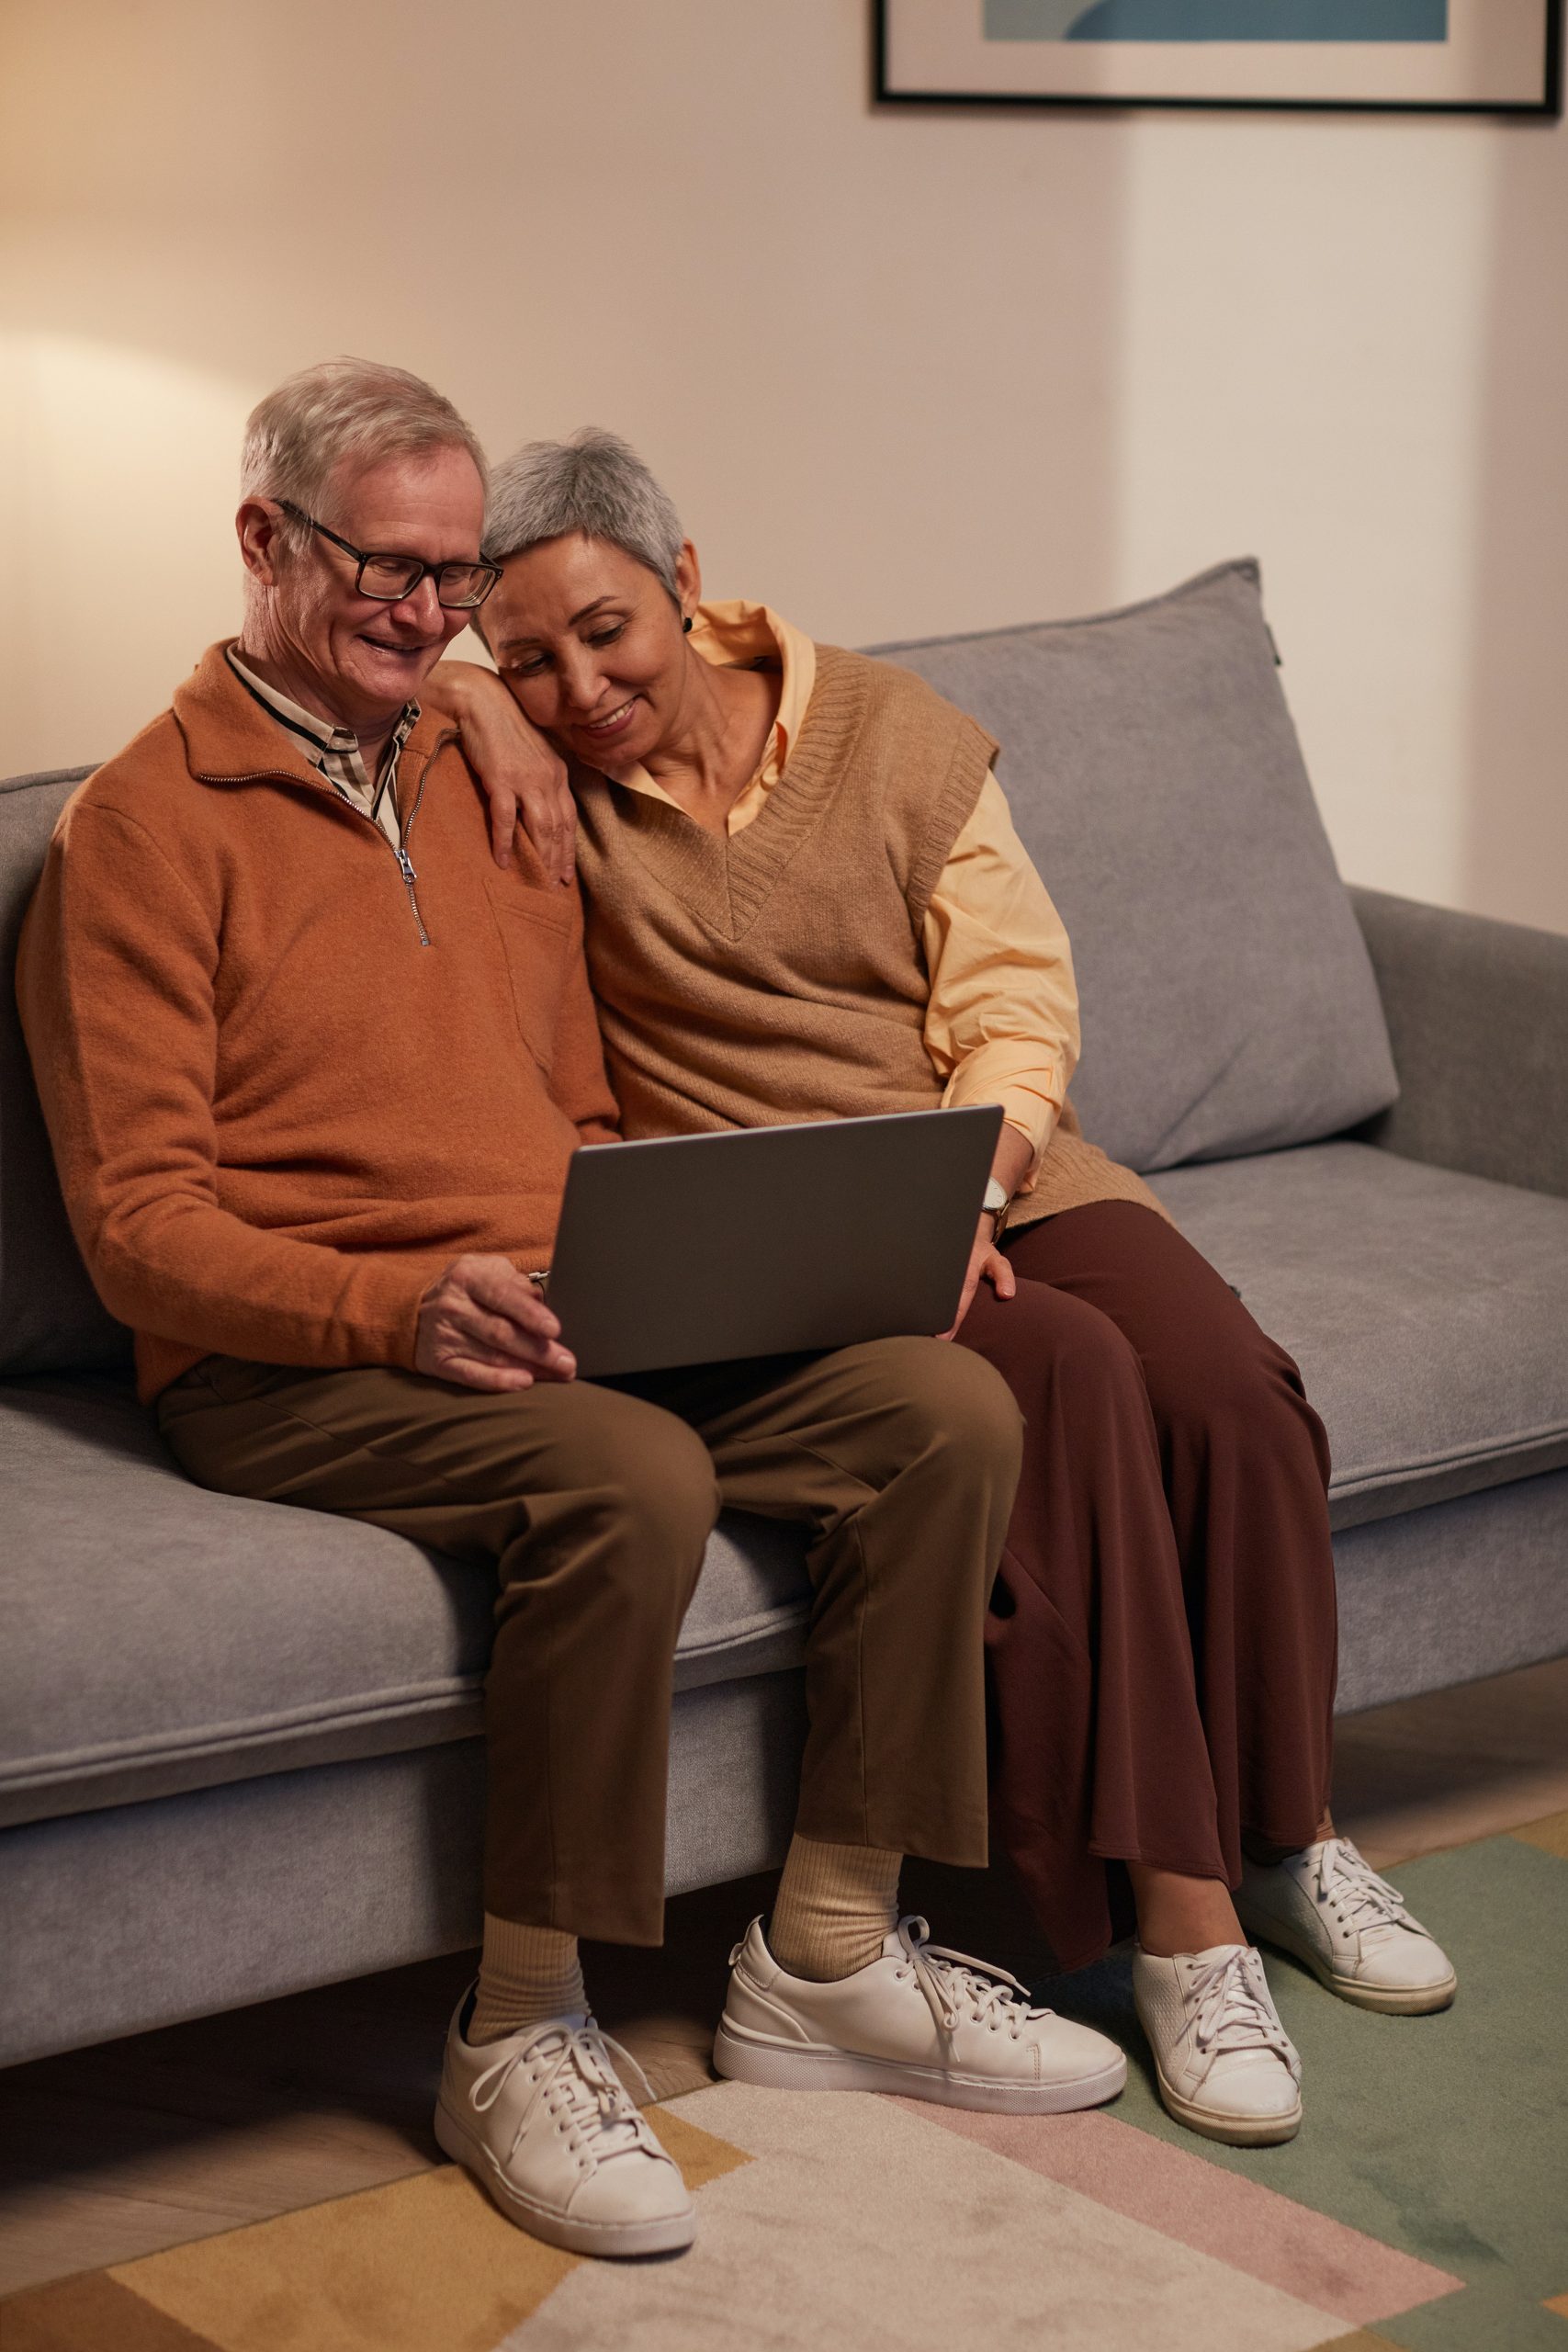 Man and woman sitting on sofa with computer